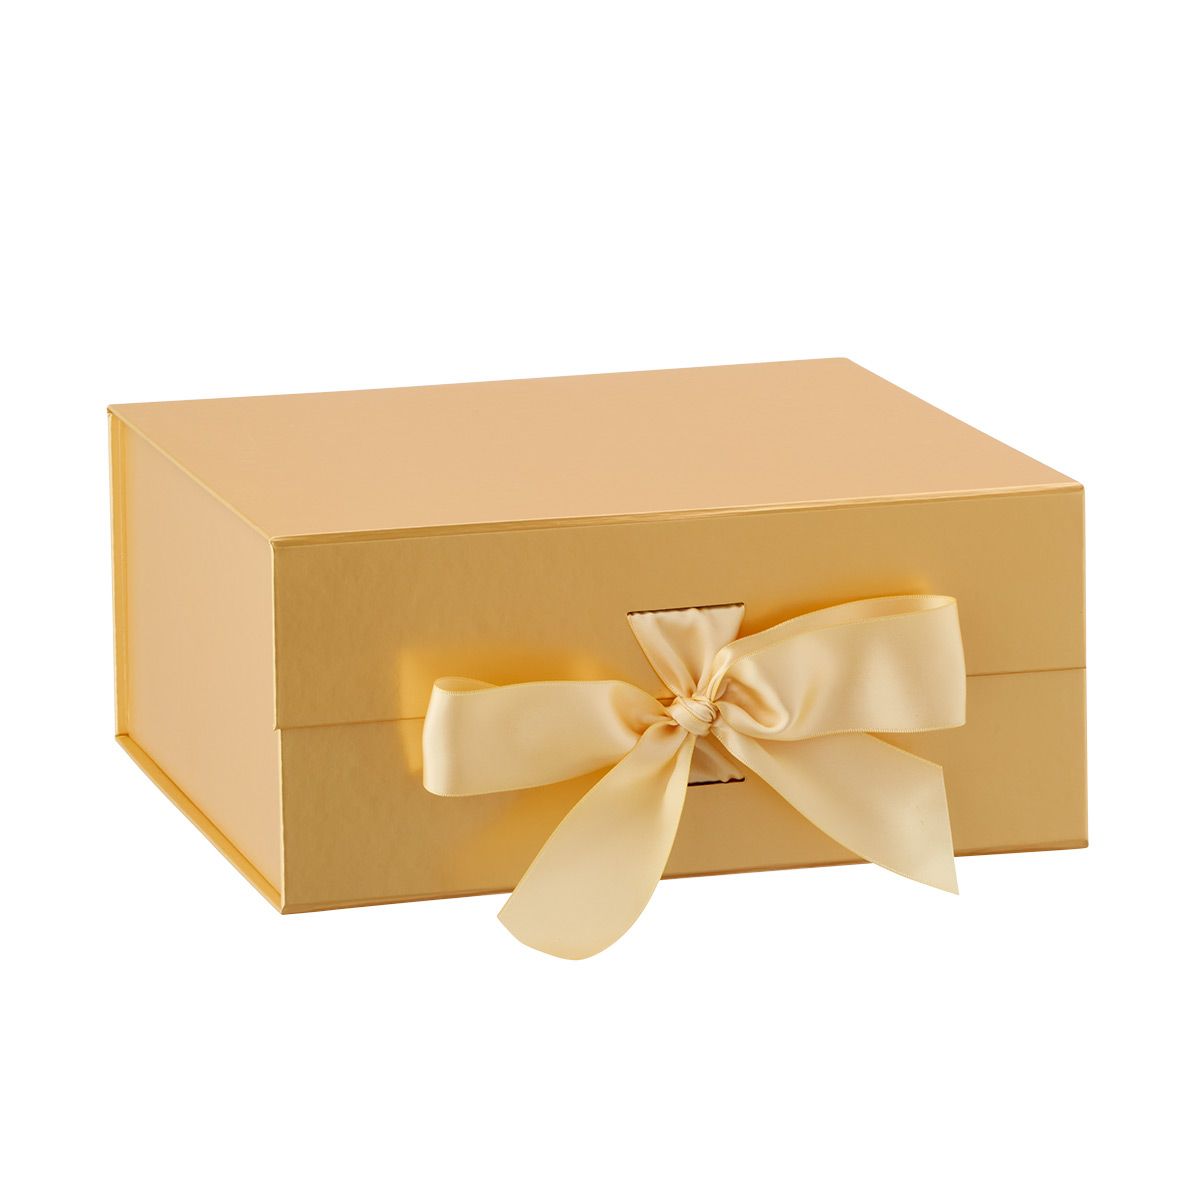 Gold Collapsible Gift Box with Bow | The Container Store